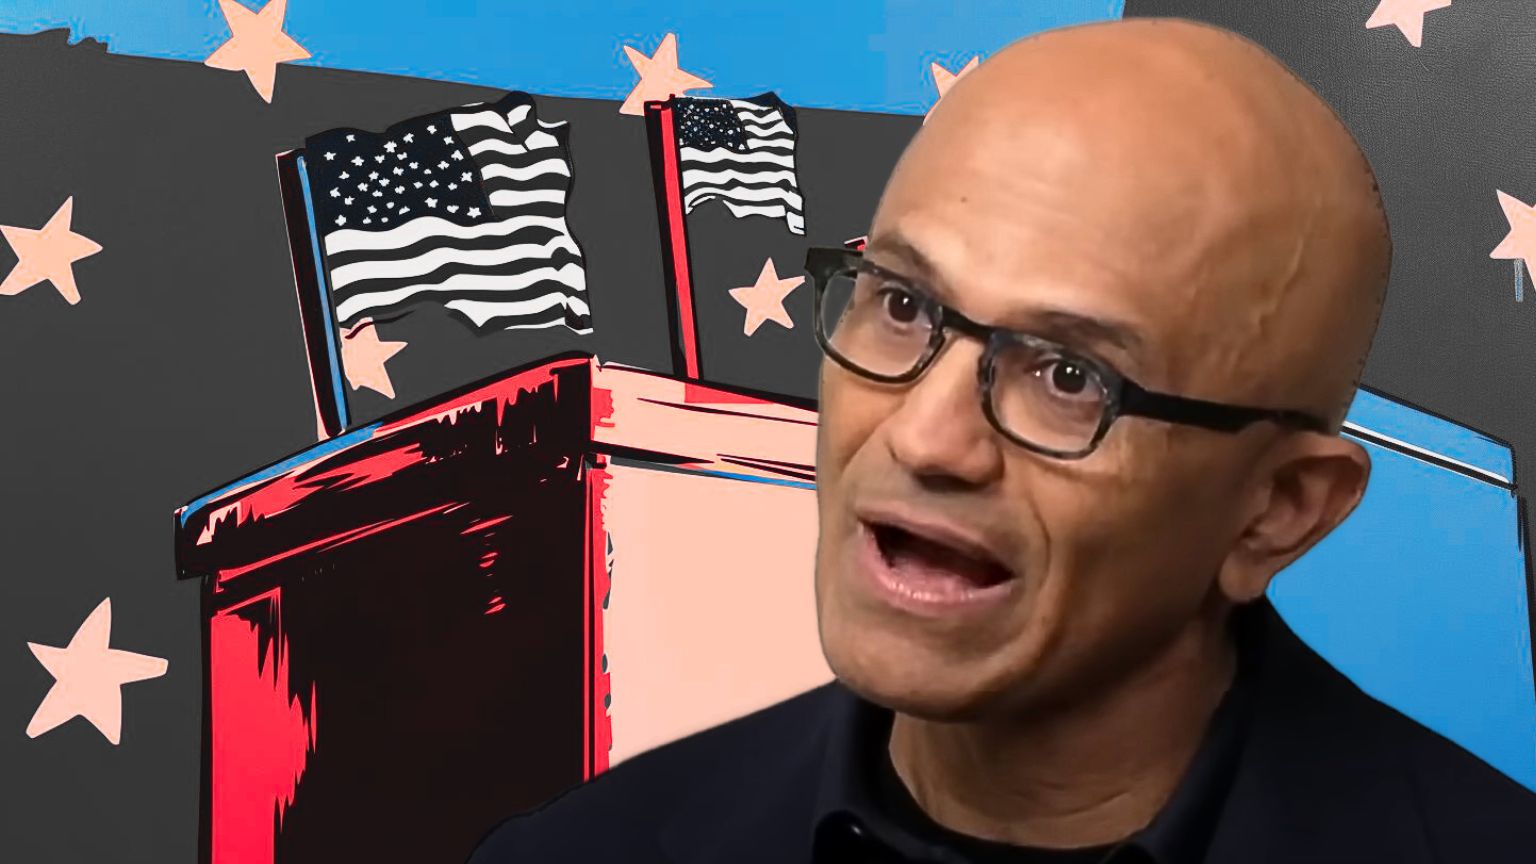 Microsoft CEO Says the Company Is Working To Address Election “Disinformation and Misinformation”